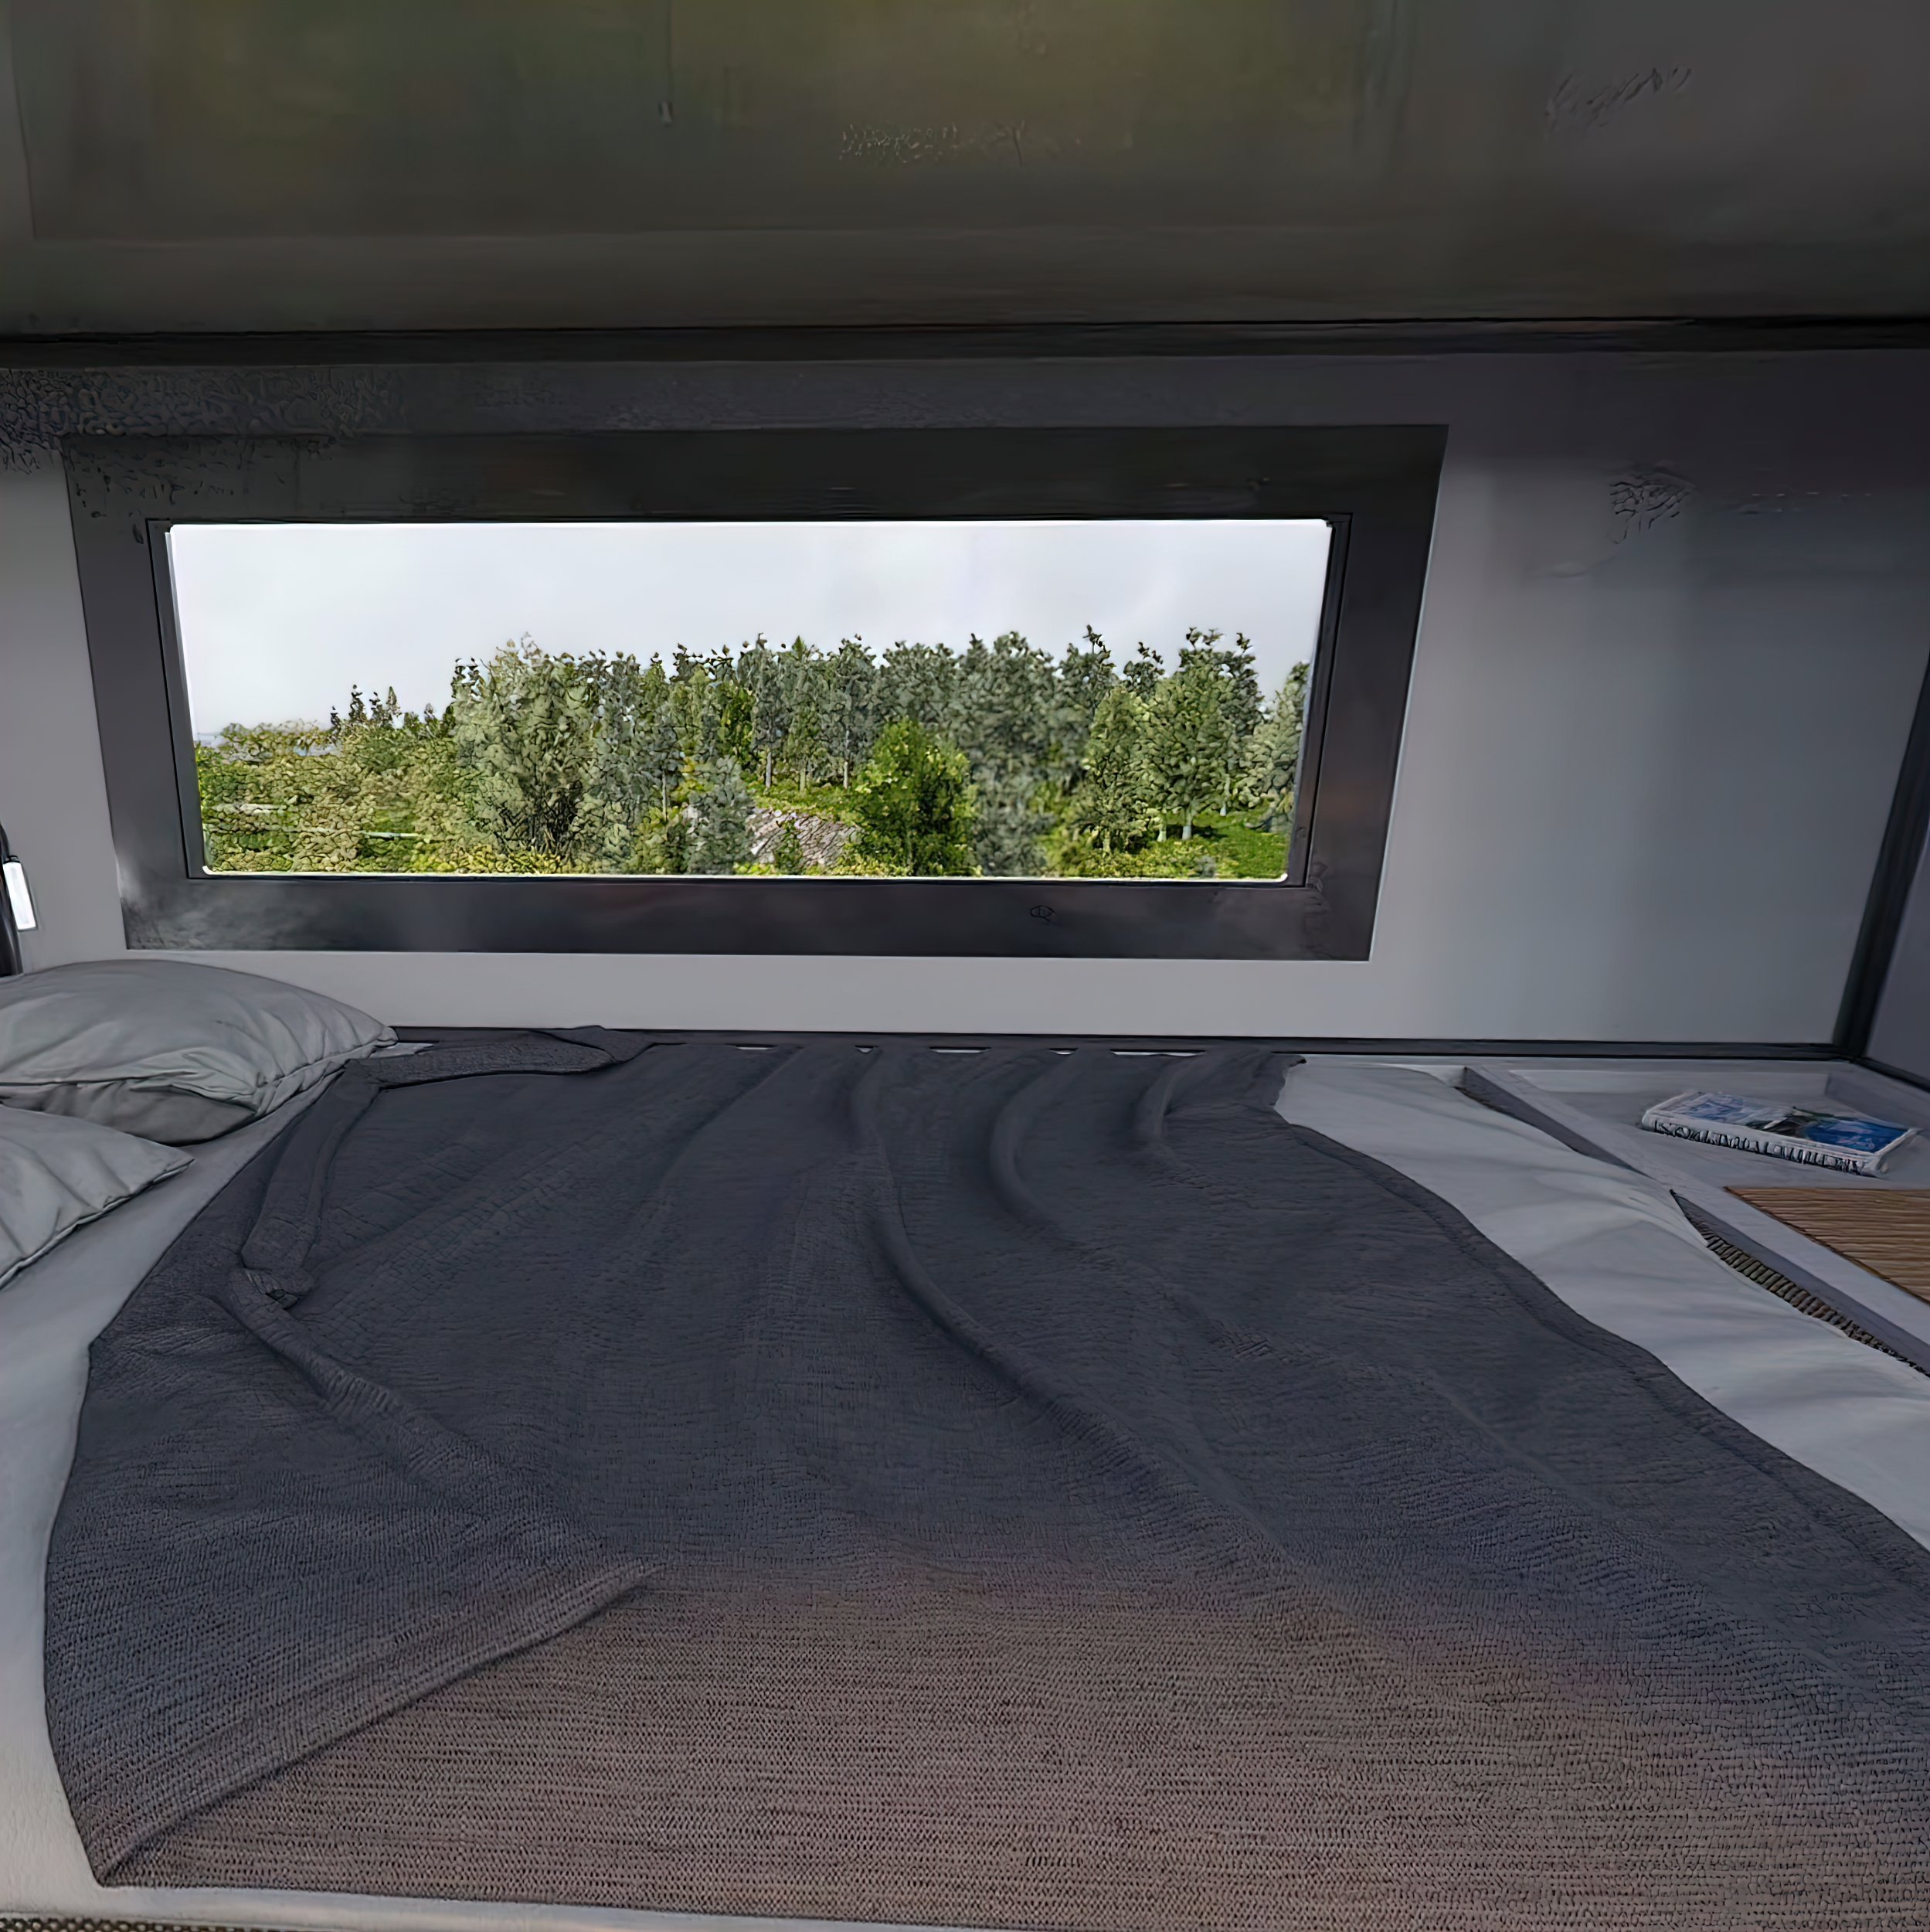  Through the process, the interior sees some changes as well. The main double bed is pulled out to the side, which conveniently frees up the multipurpose floor space to access the indoor kitchen and a few drawers and slide-outs from the bed frame. 